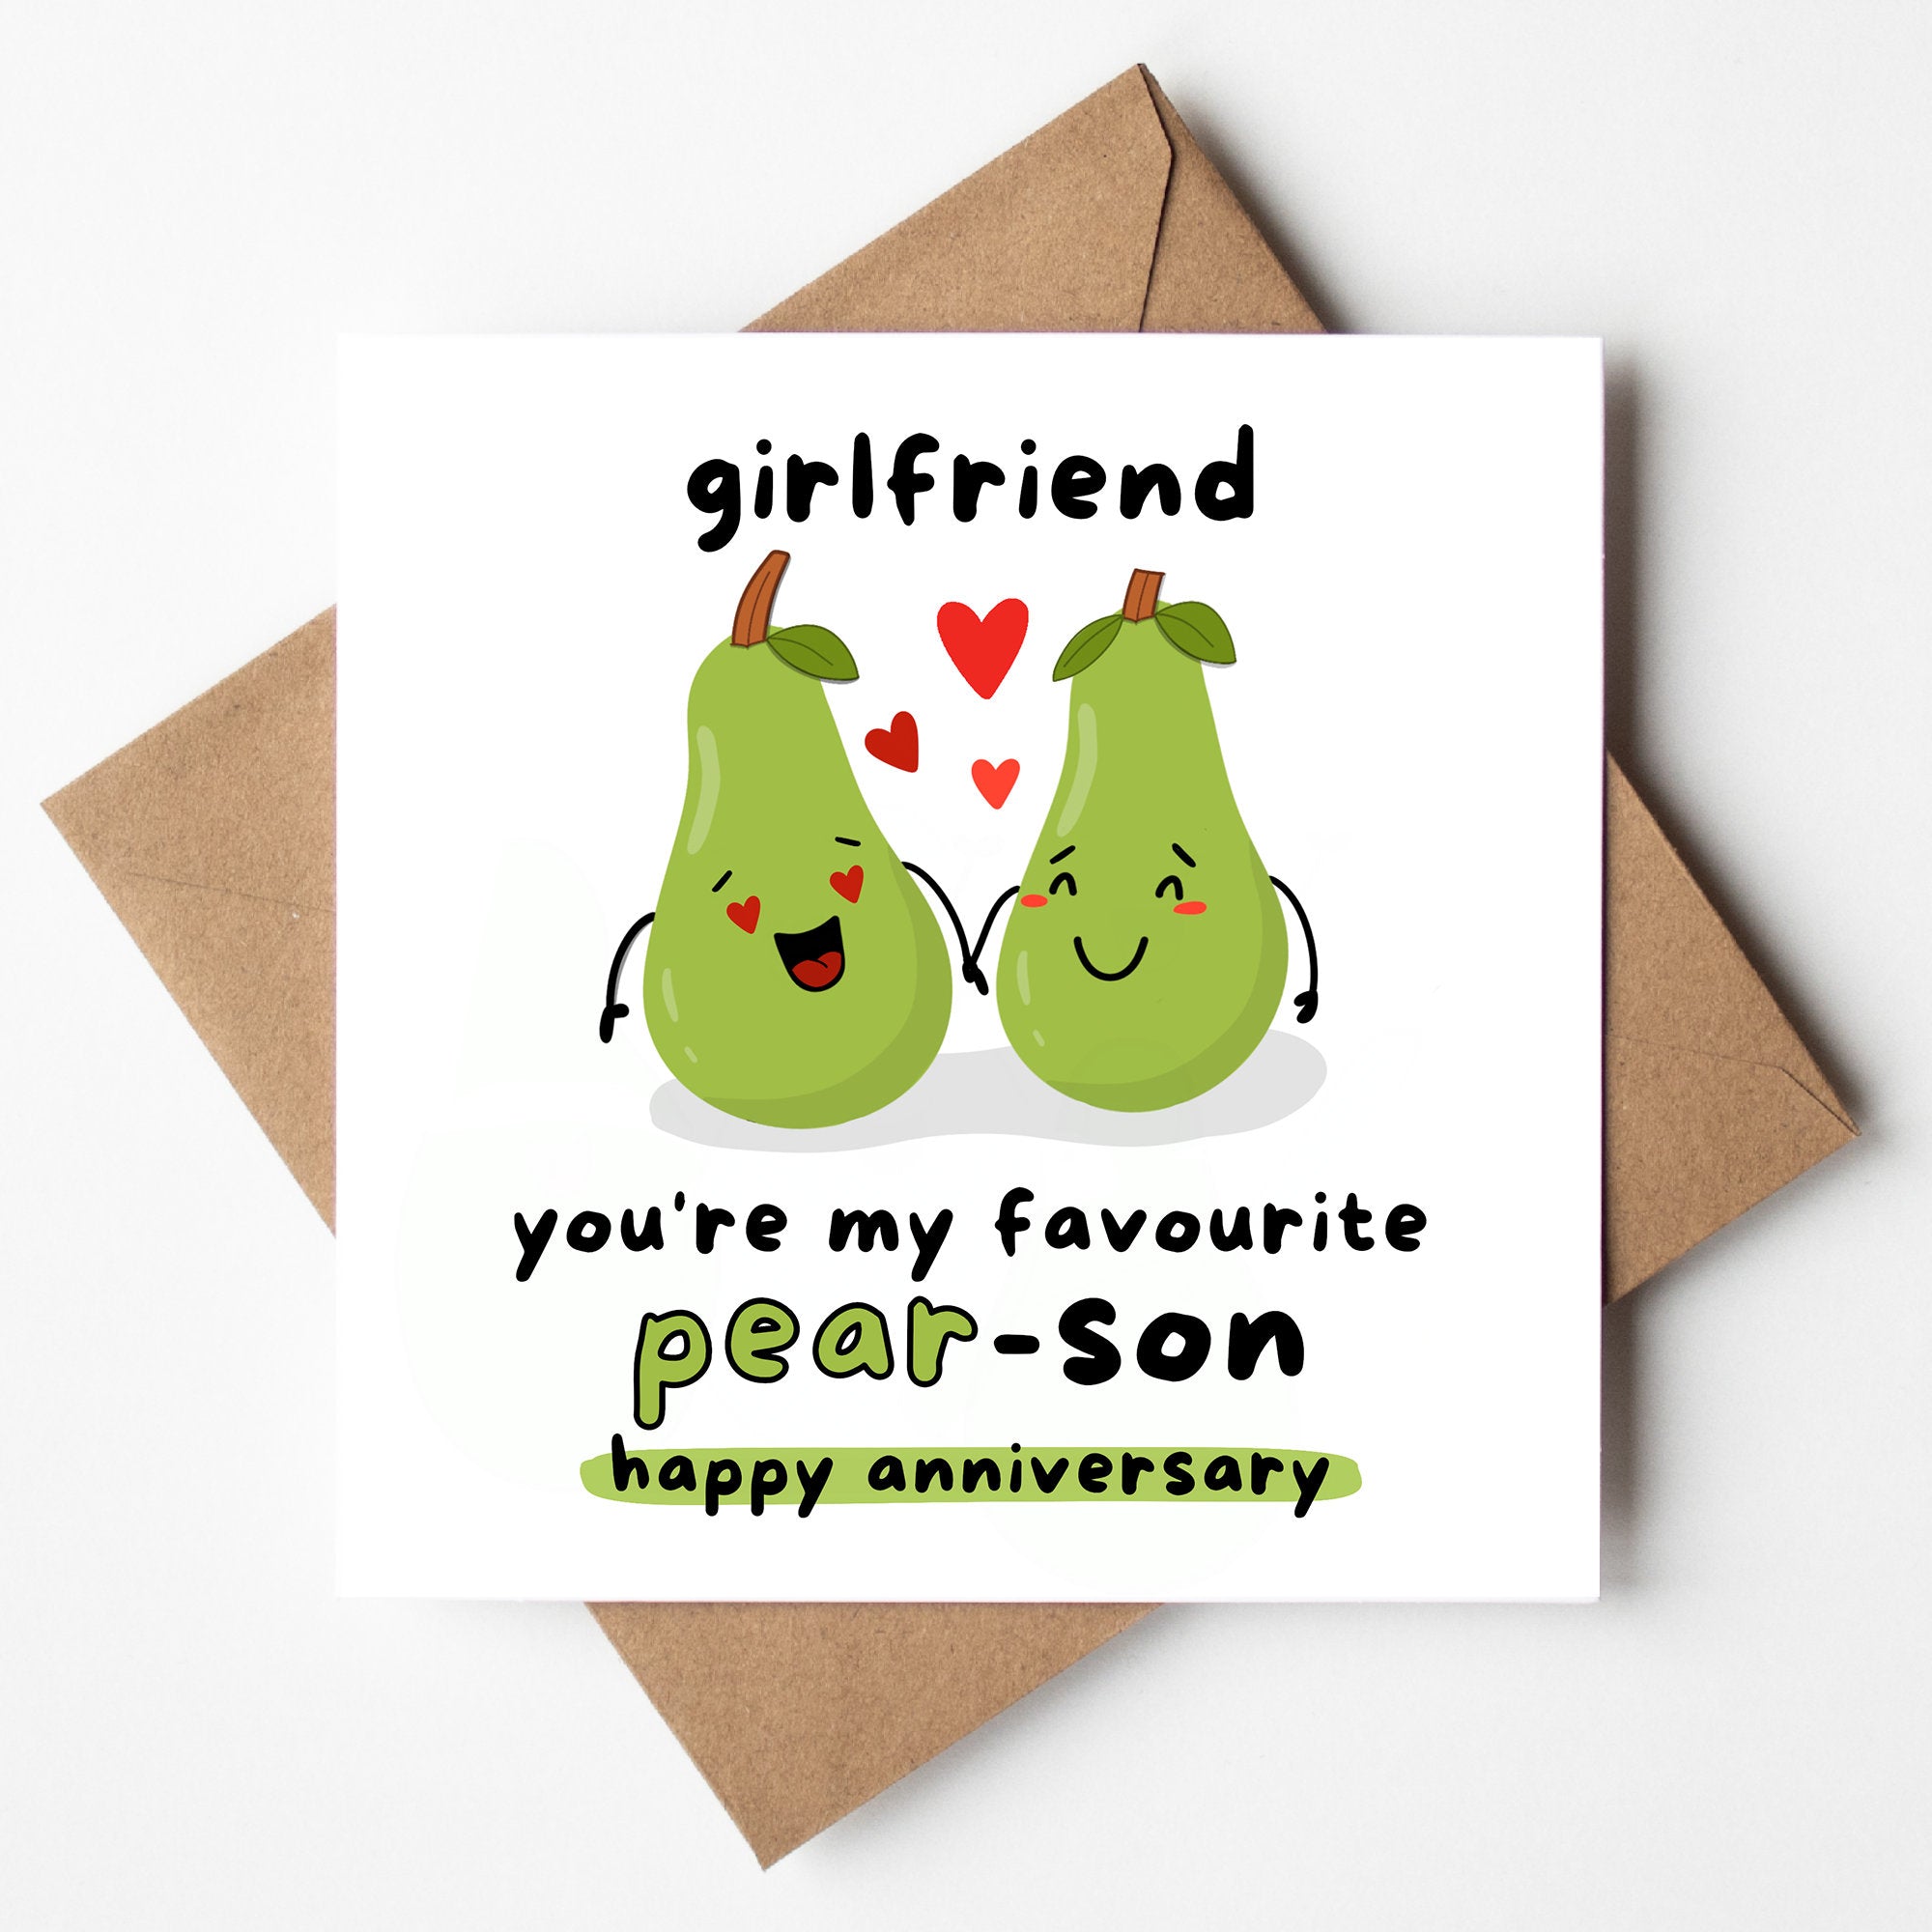 Girlfriend You're My Favourite Pear-son, Best Girlfriend Ever, From Him, Anniversary Gifts, Girlfriend Cards, For Her, Anniversary For Her